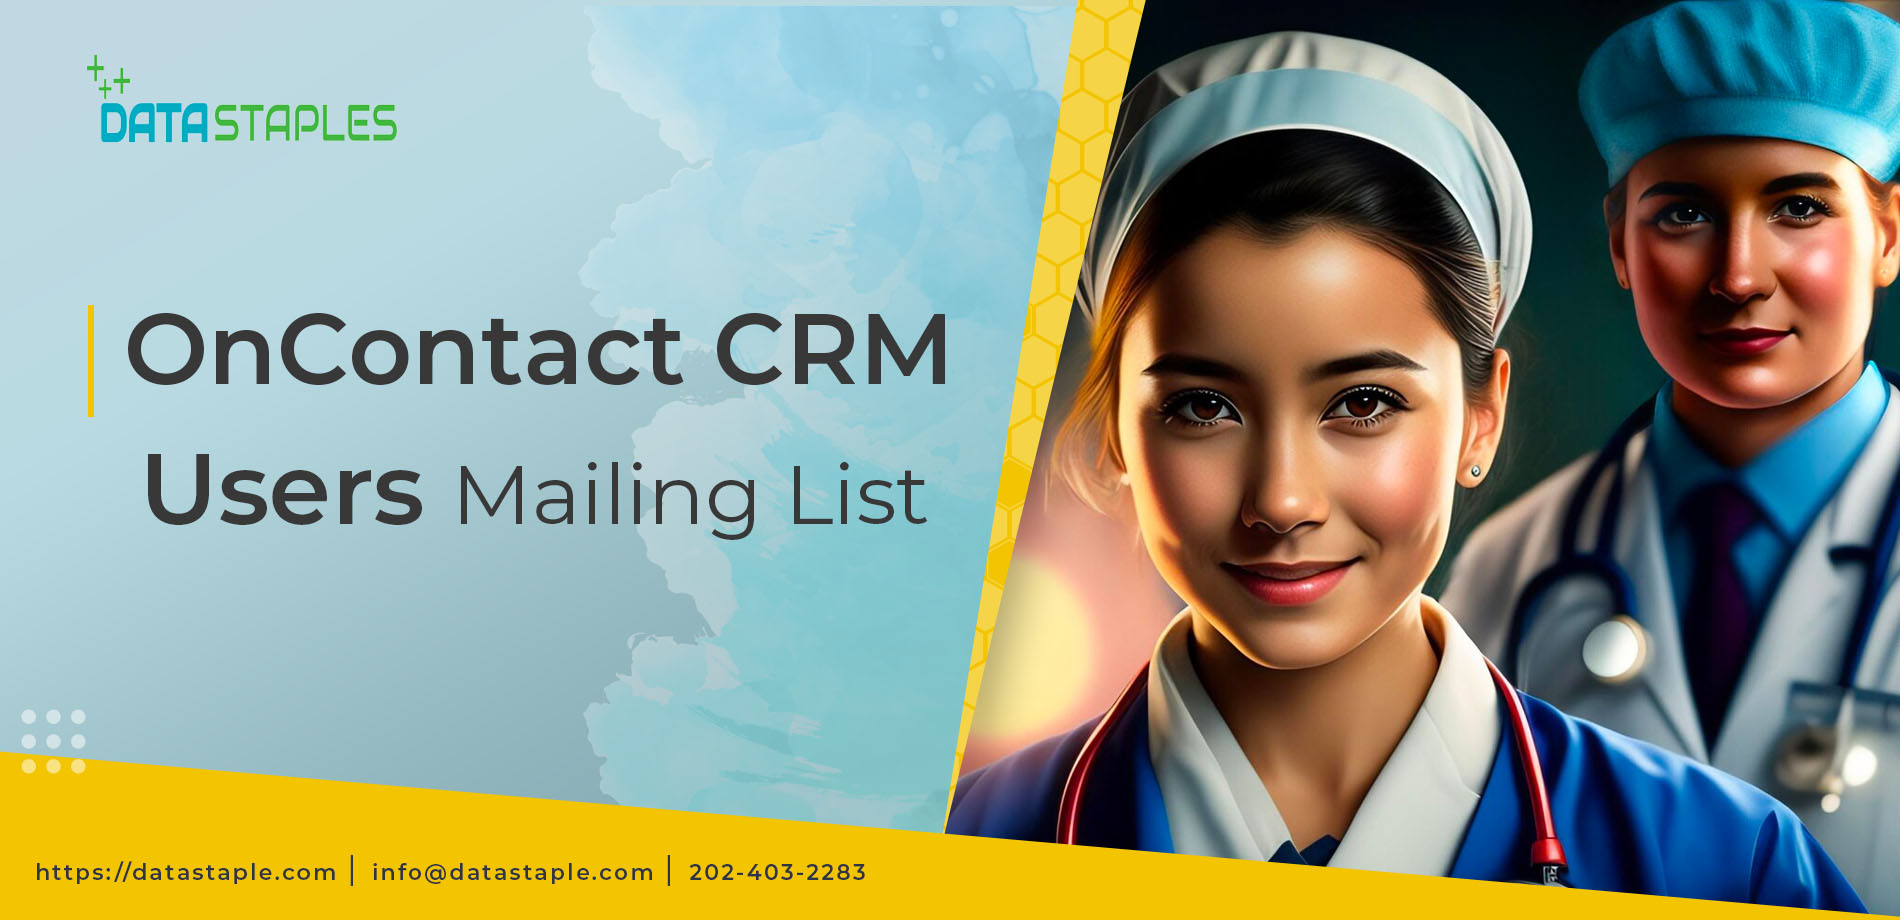 OnContact CRM Users List | OnContact CRM Users Mailing List | DataStaples